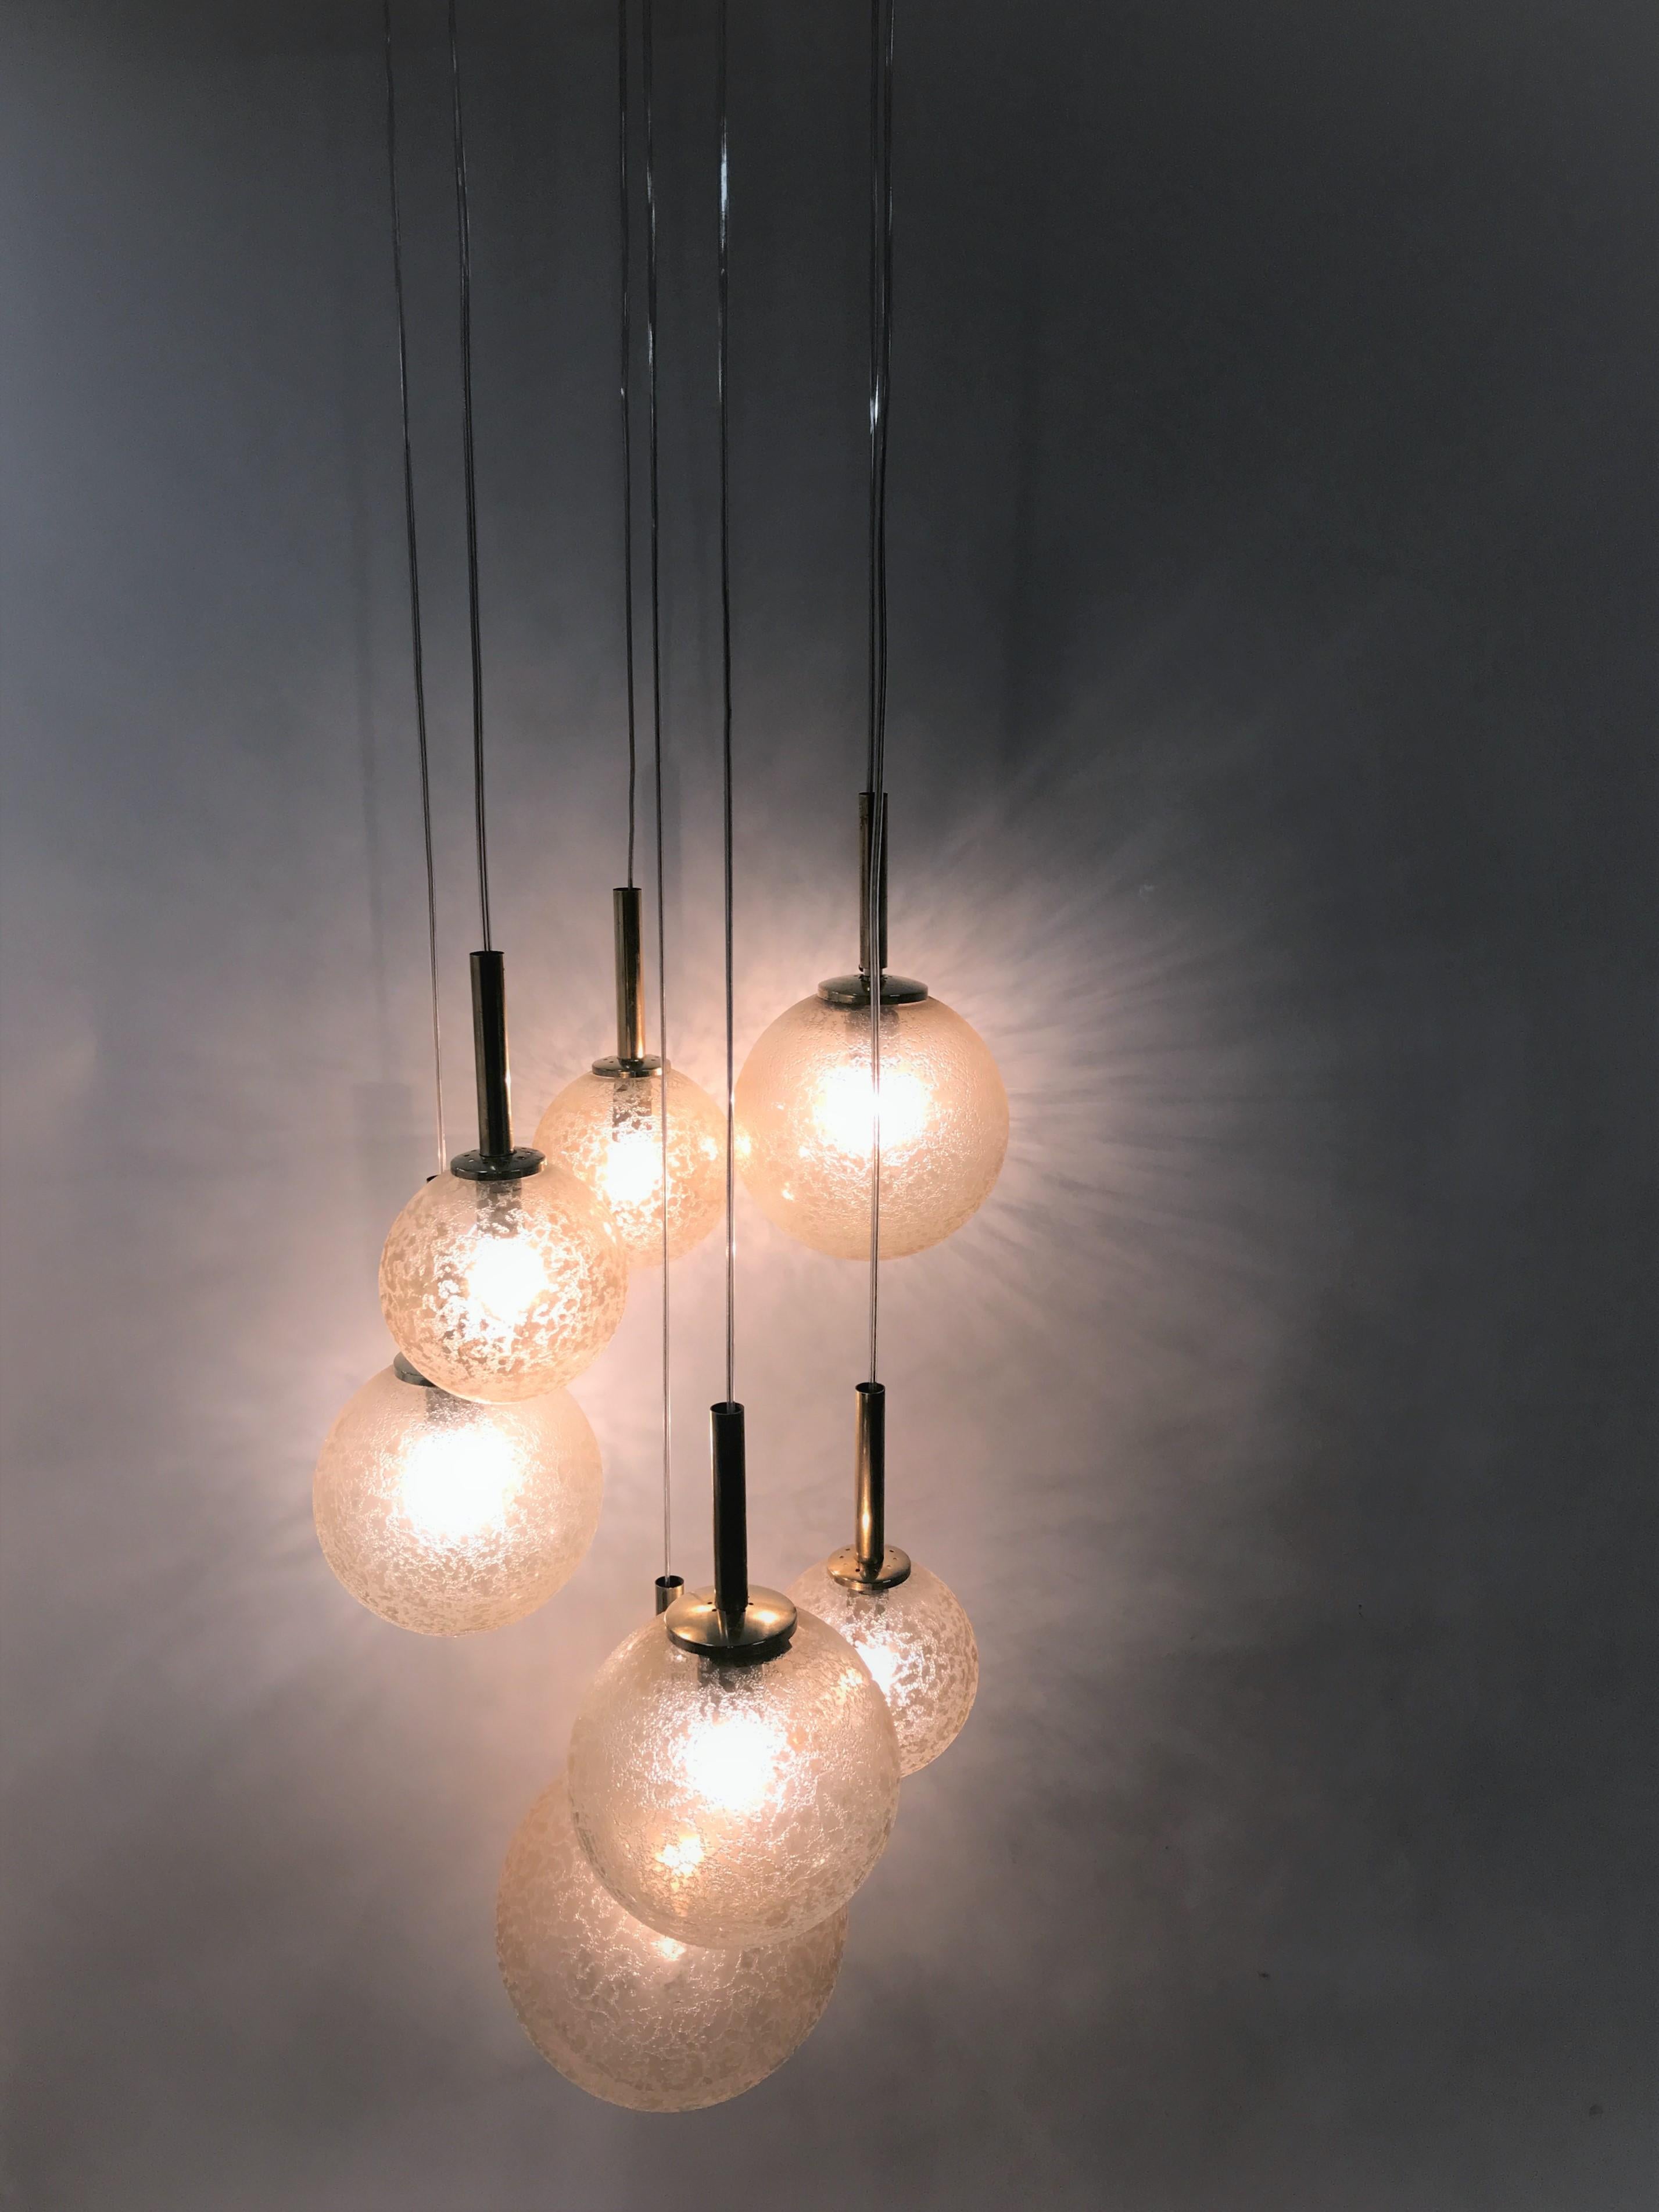 Midcentury brass and glass chandelier bu Doria Leuchten.

This multi level or cascading chandelier consists of 7 glass/gold globes of different sizes.

The chandelier's height can be adjusted with the cables.

Completely rewired and tested.